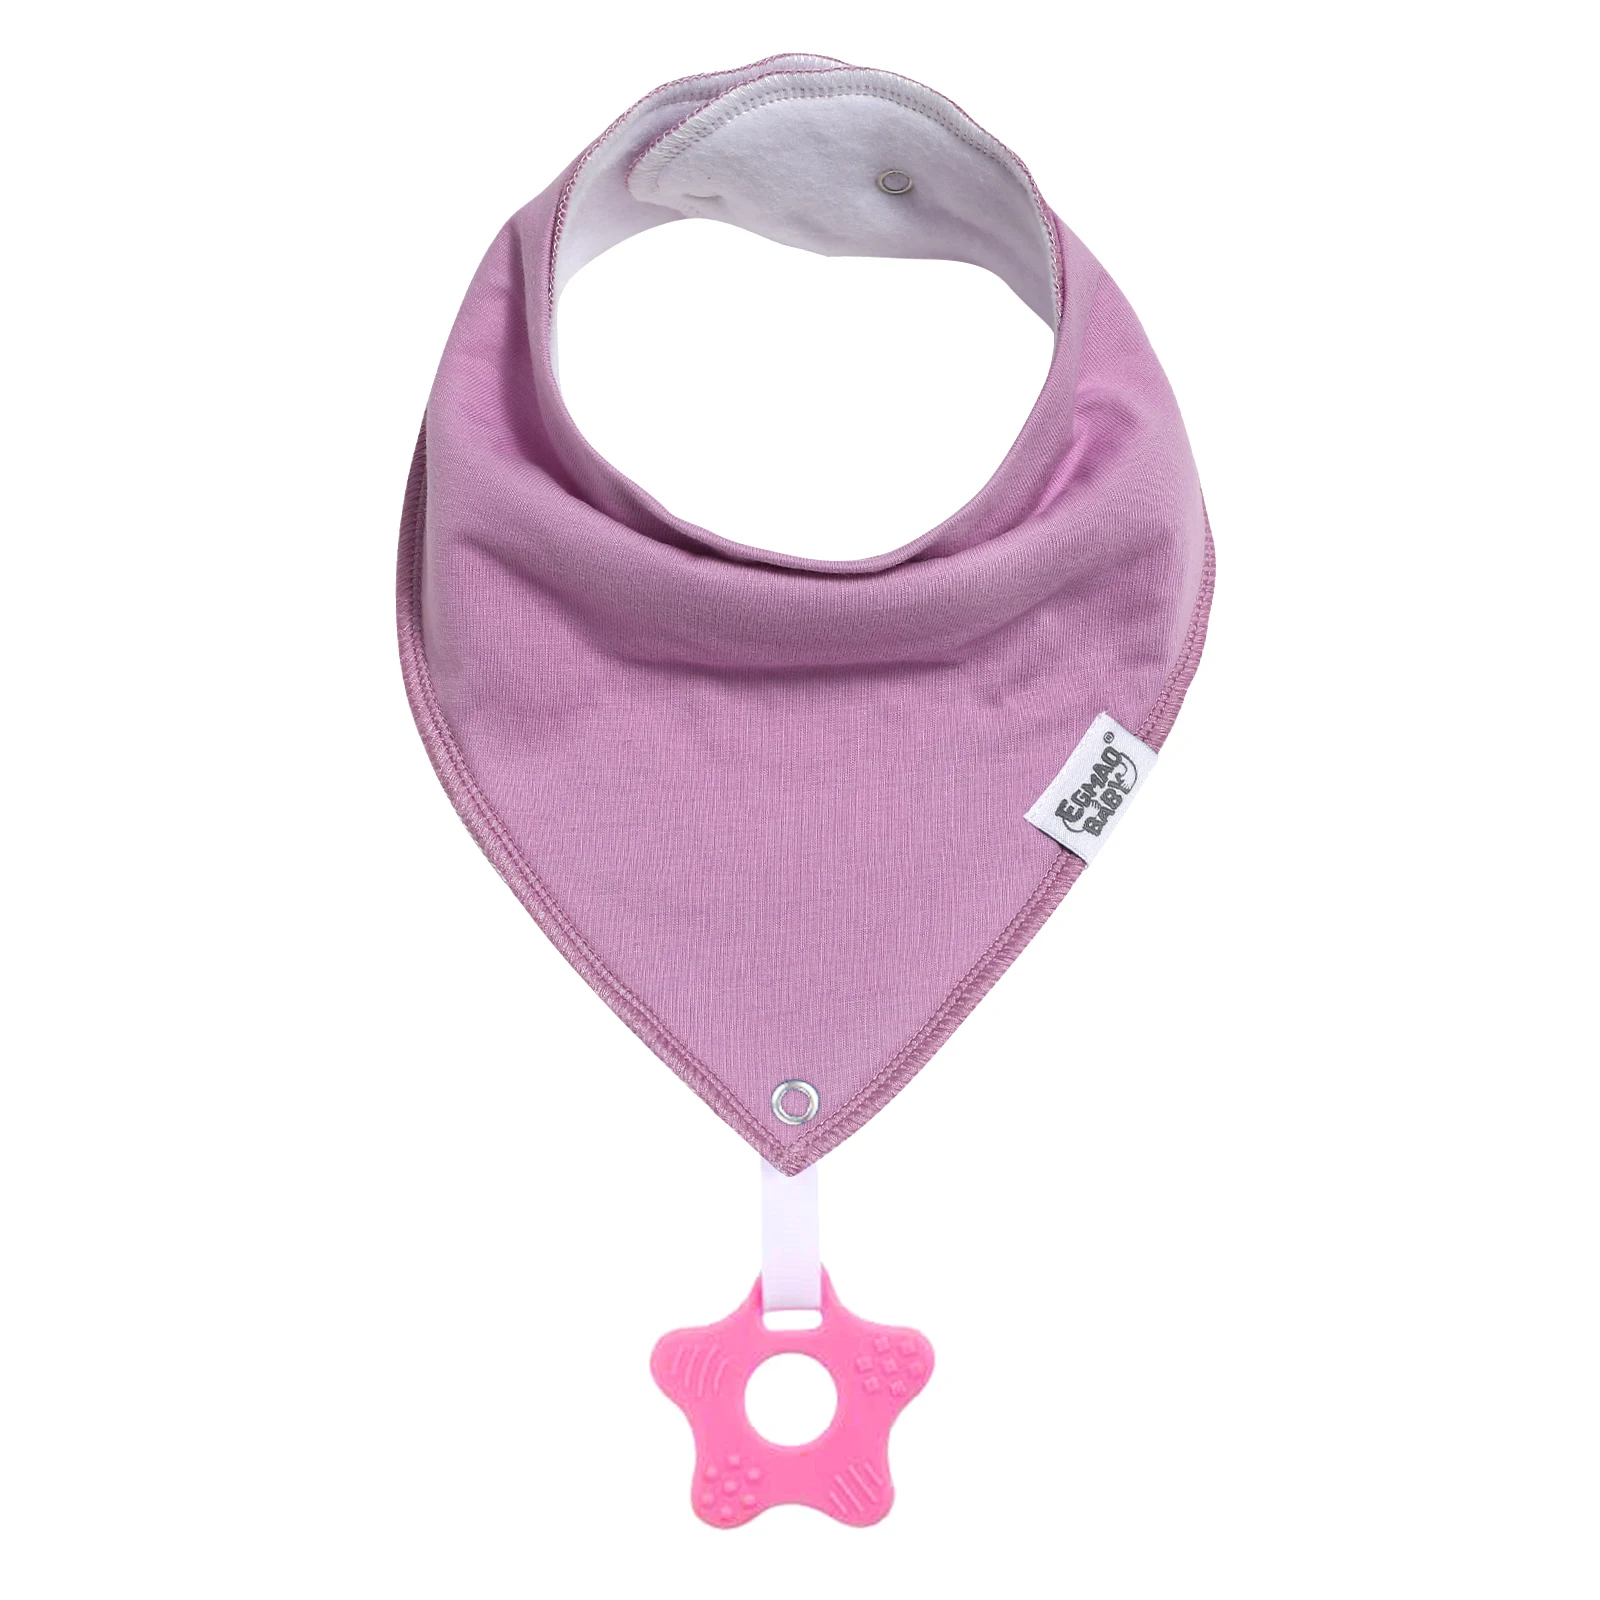 Baby Accessories luxury	 New Fashion Baby Bandana Drool Bibs and Teething Toys Made with 100% Organic Cotton Super Absorbent and Soft Unisex Newborn Bibs cheap baby accessories	 Baby Accessories